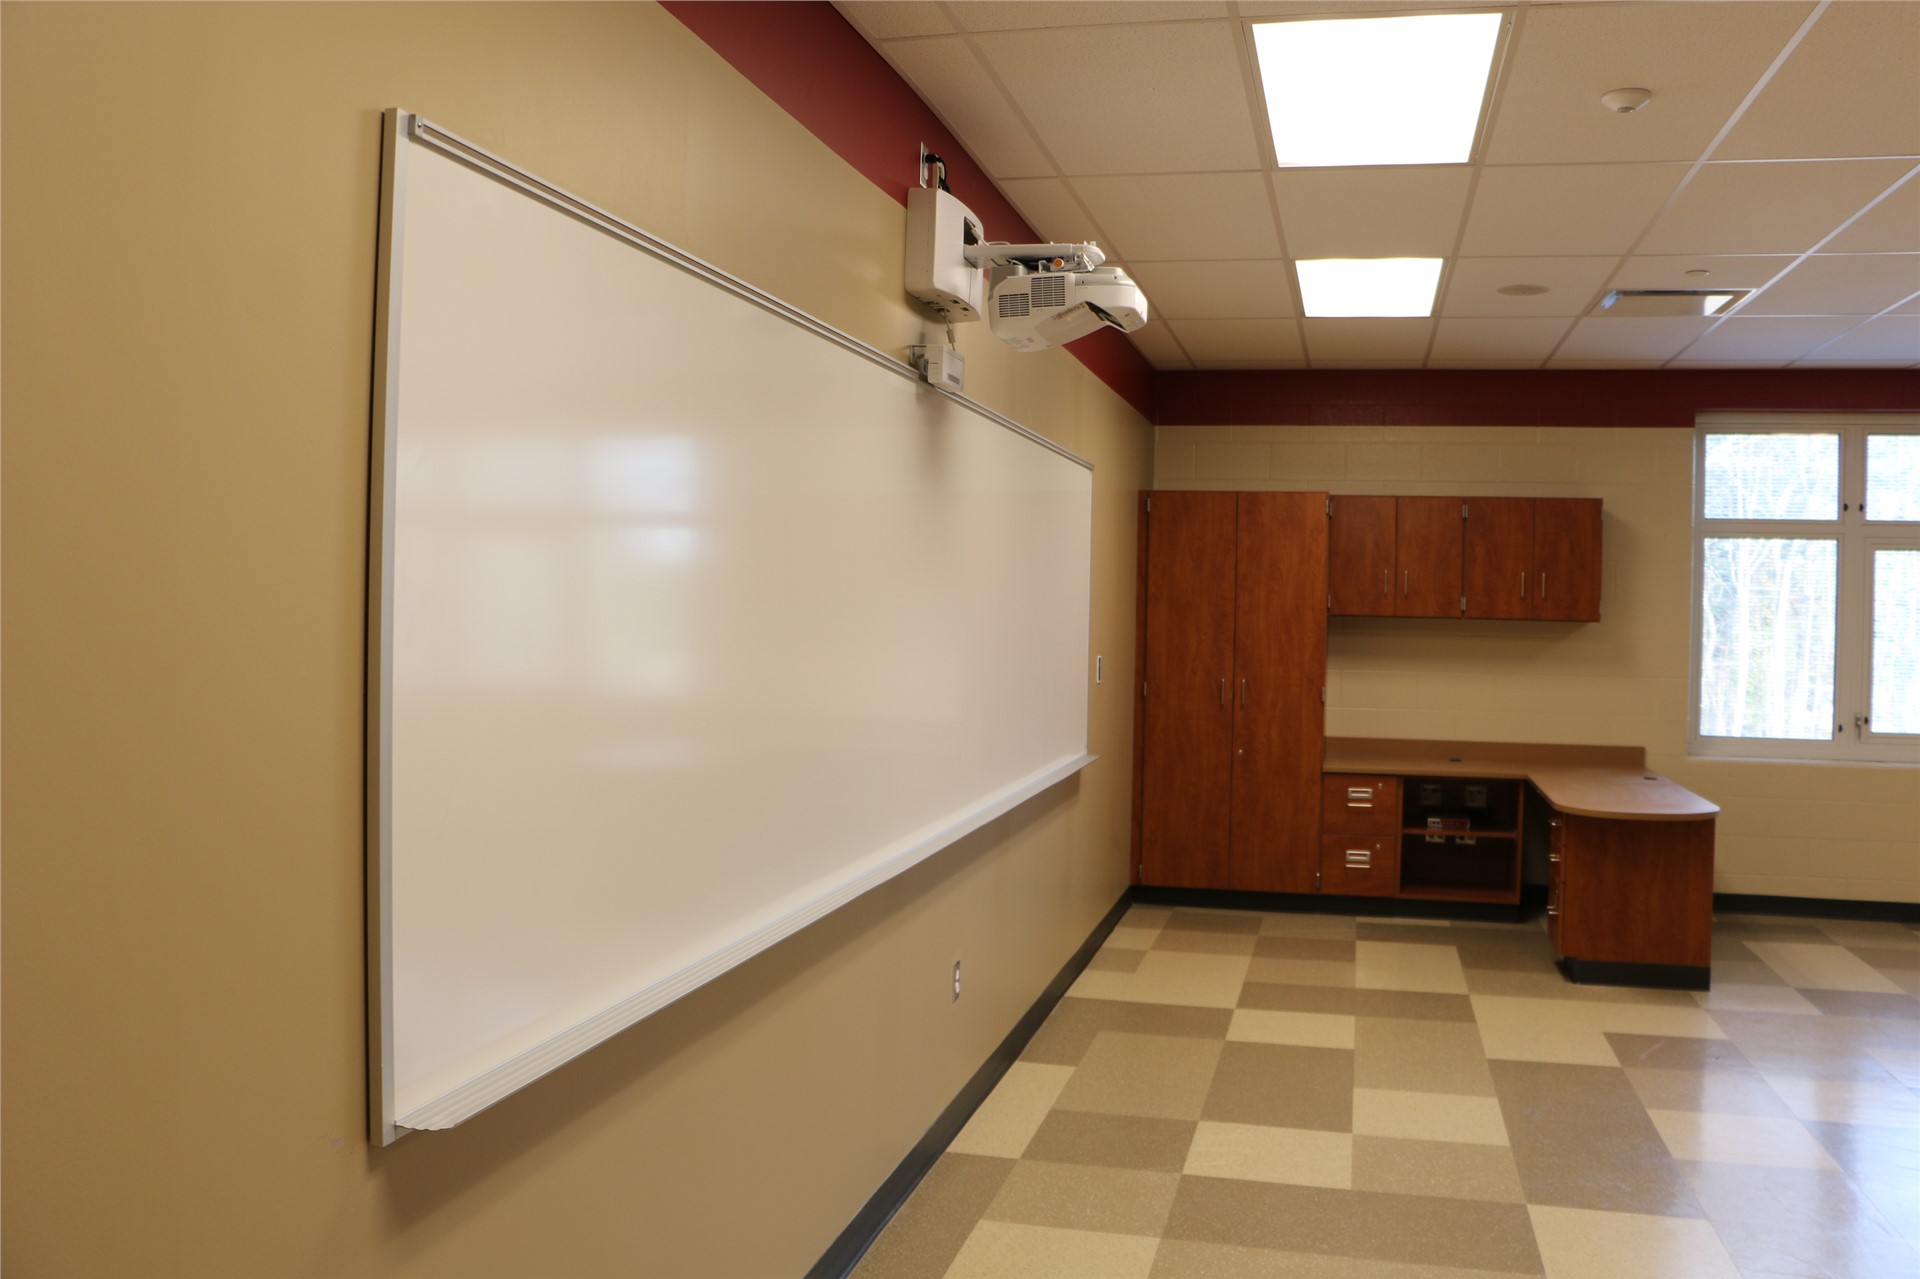 Typical Classroom - Teaching/Front Wall